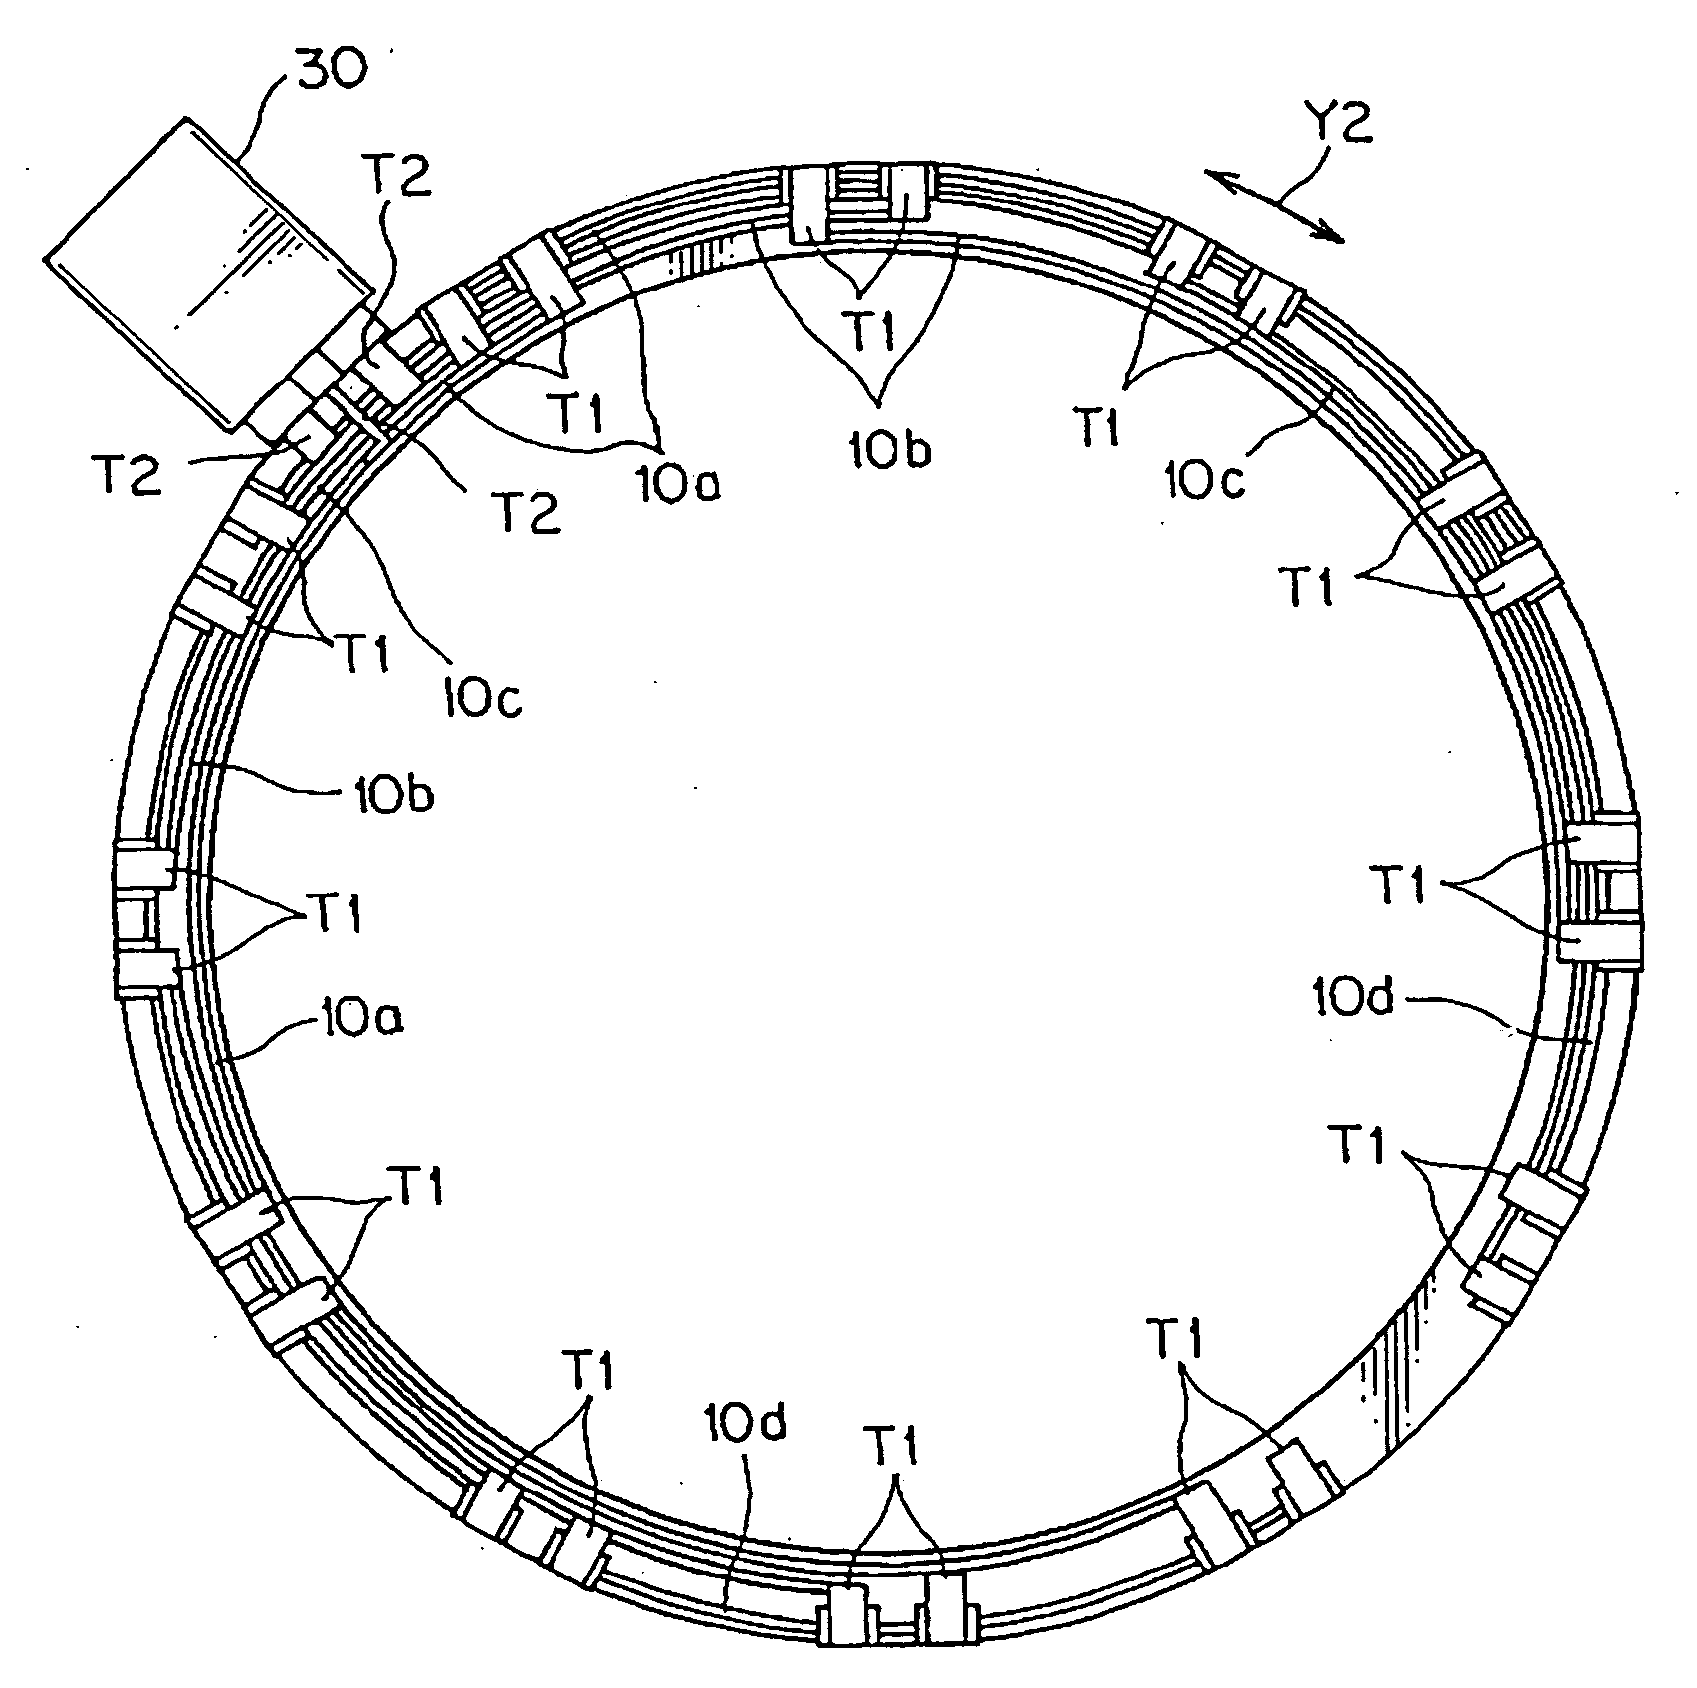 Electric power distribution device